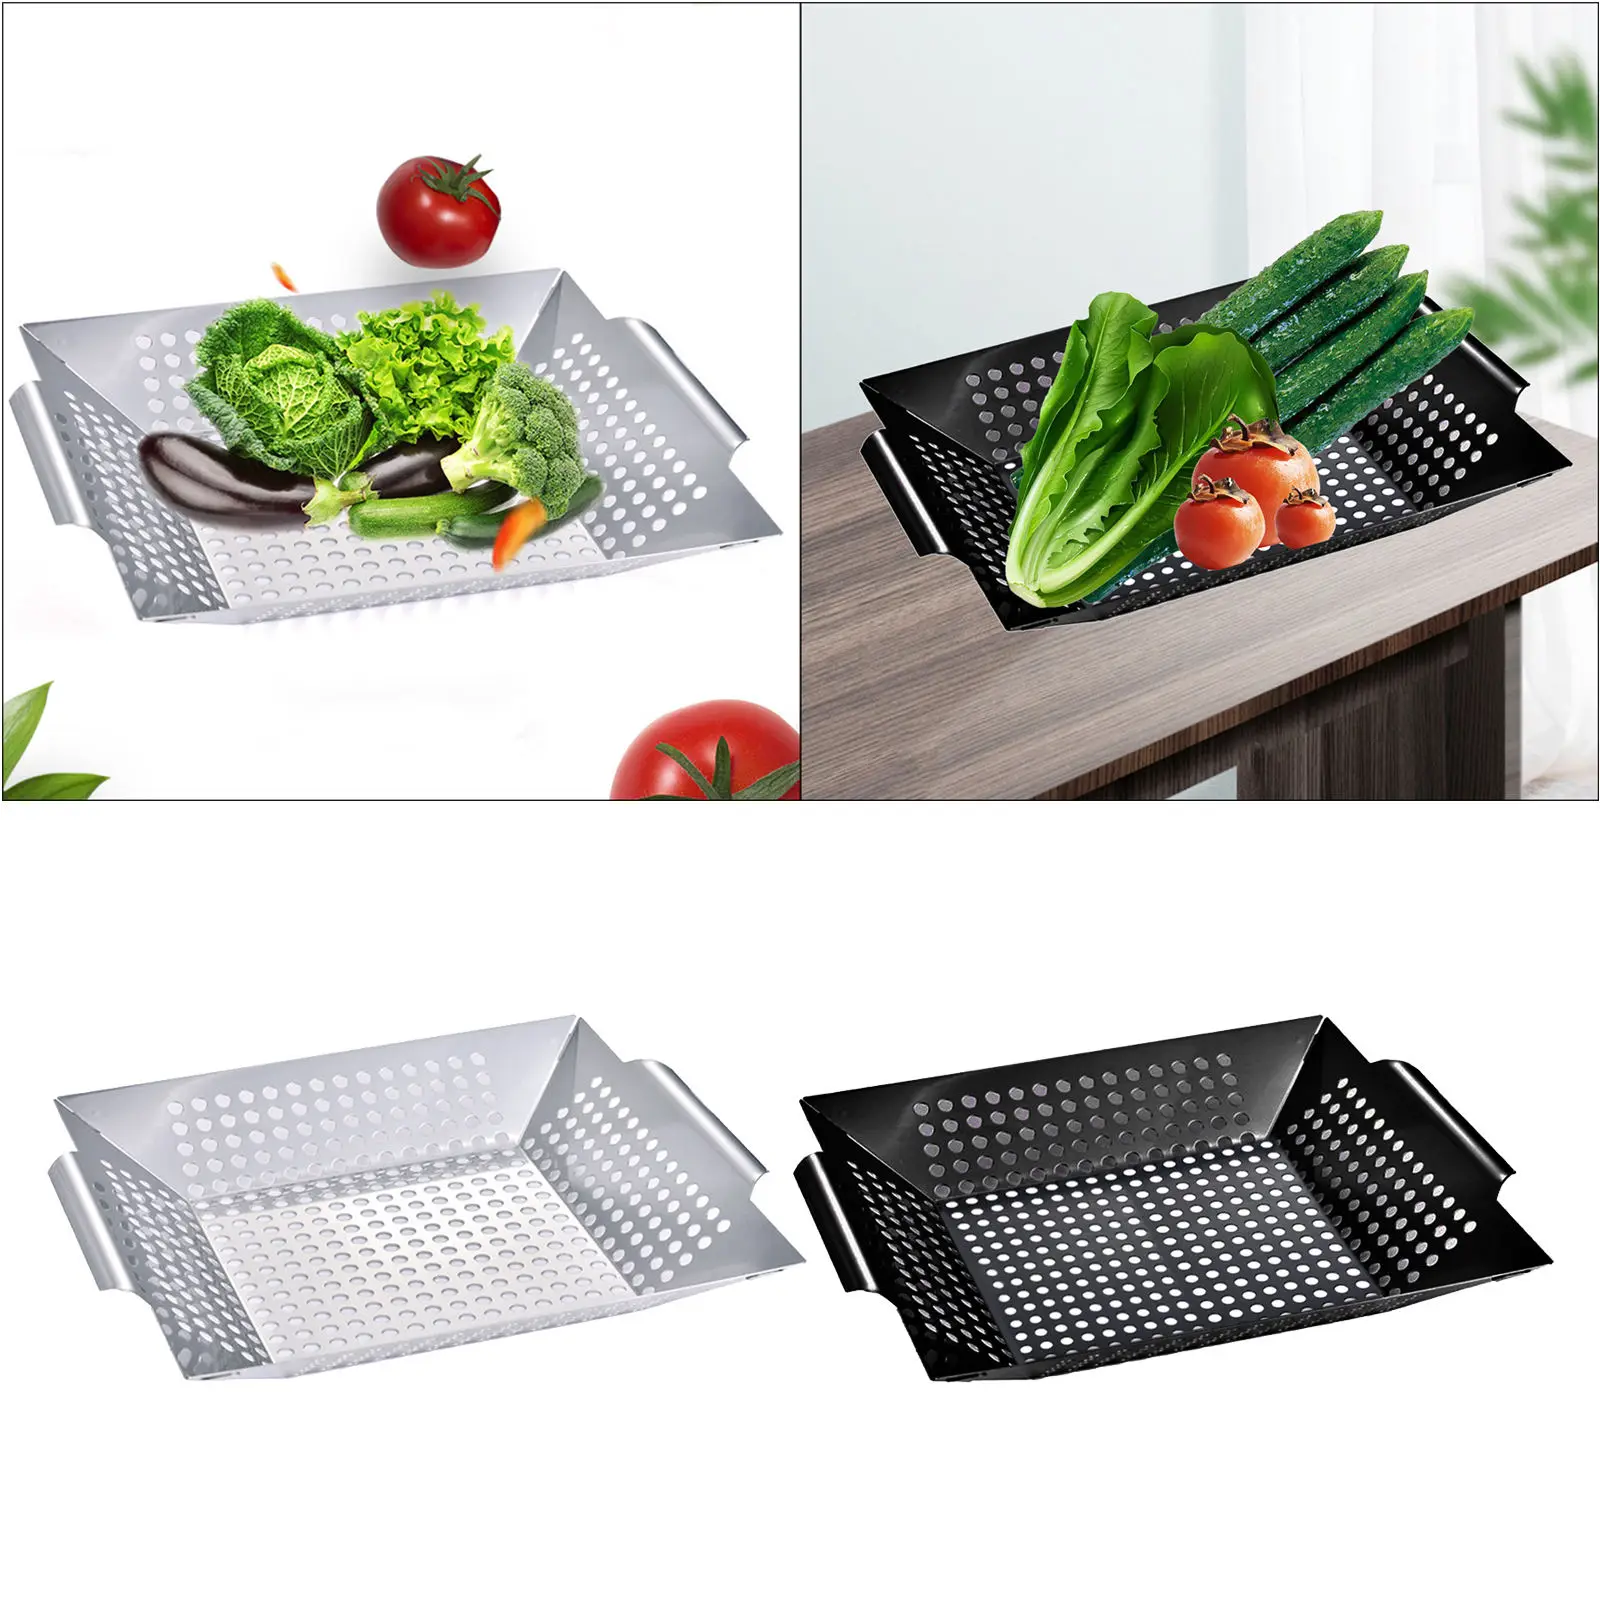 Metal BBQ Grill Basket Vegetable Meat Holder Bowl Anti-rust Holes Barbecue Tool